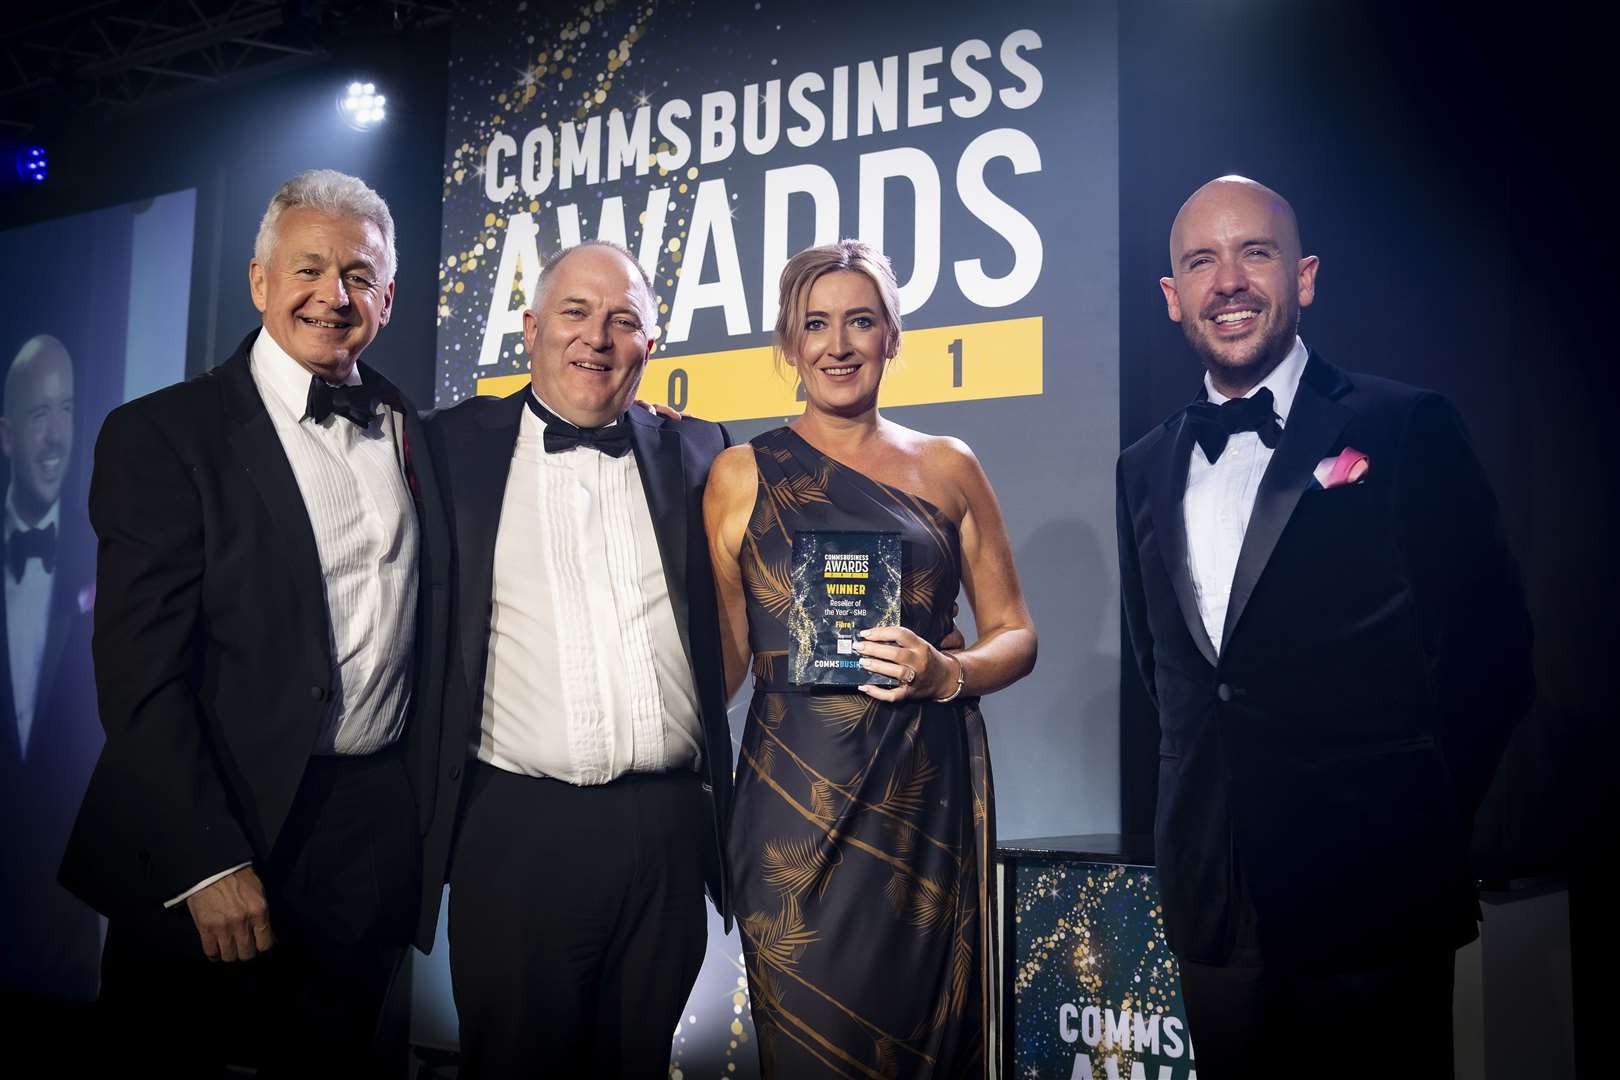 Garry Growns of event sponsor Digital Wholesale Solutions, Fibre 1’s Stewart Macdonald and Lynn Stewart, and comedian Tom Allen at the awards ceremony.